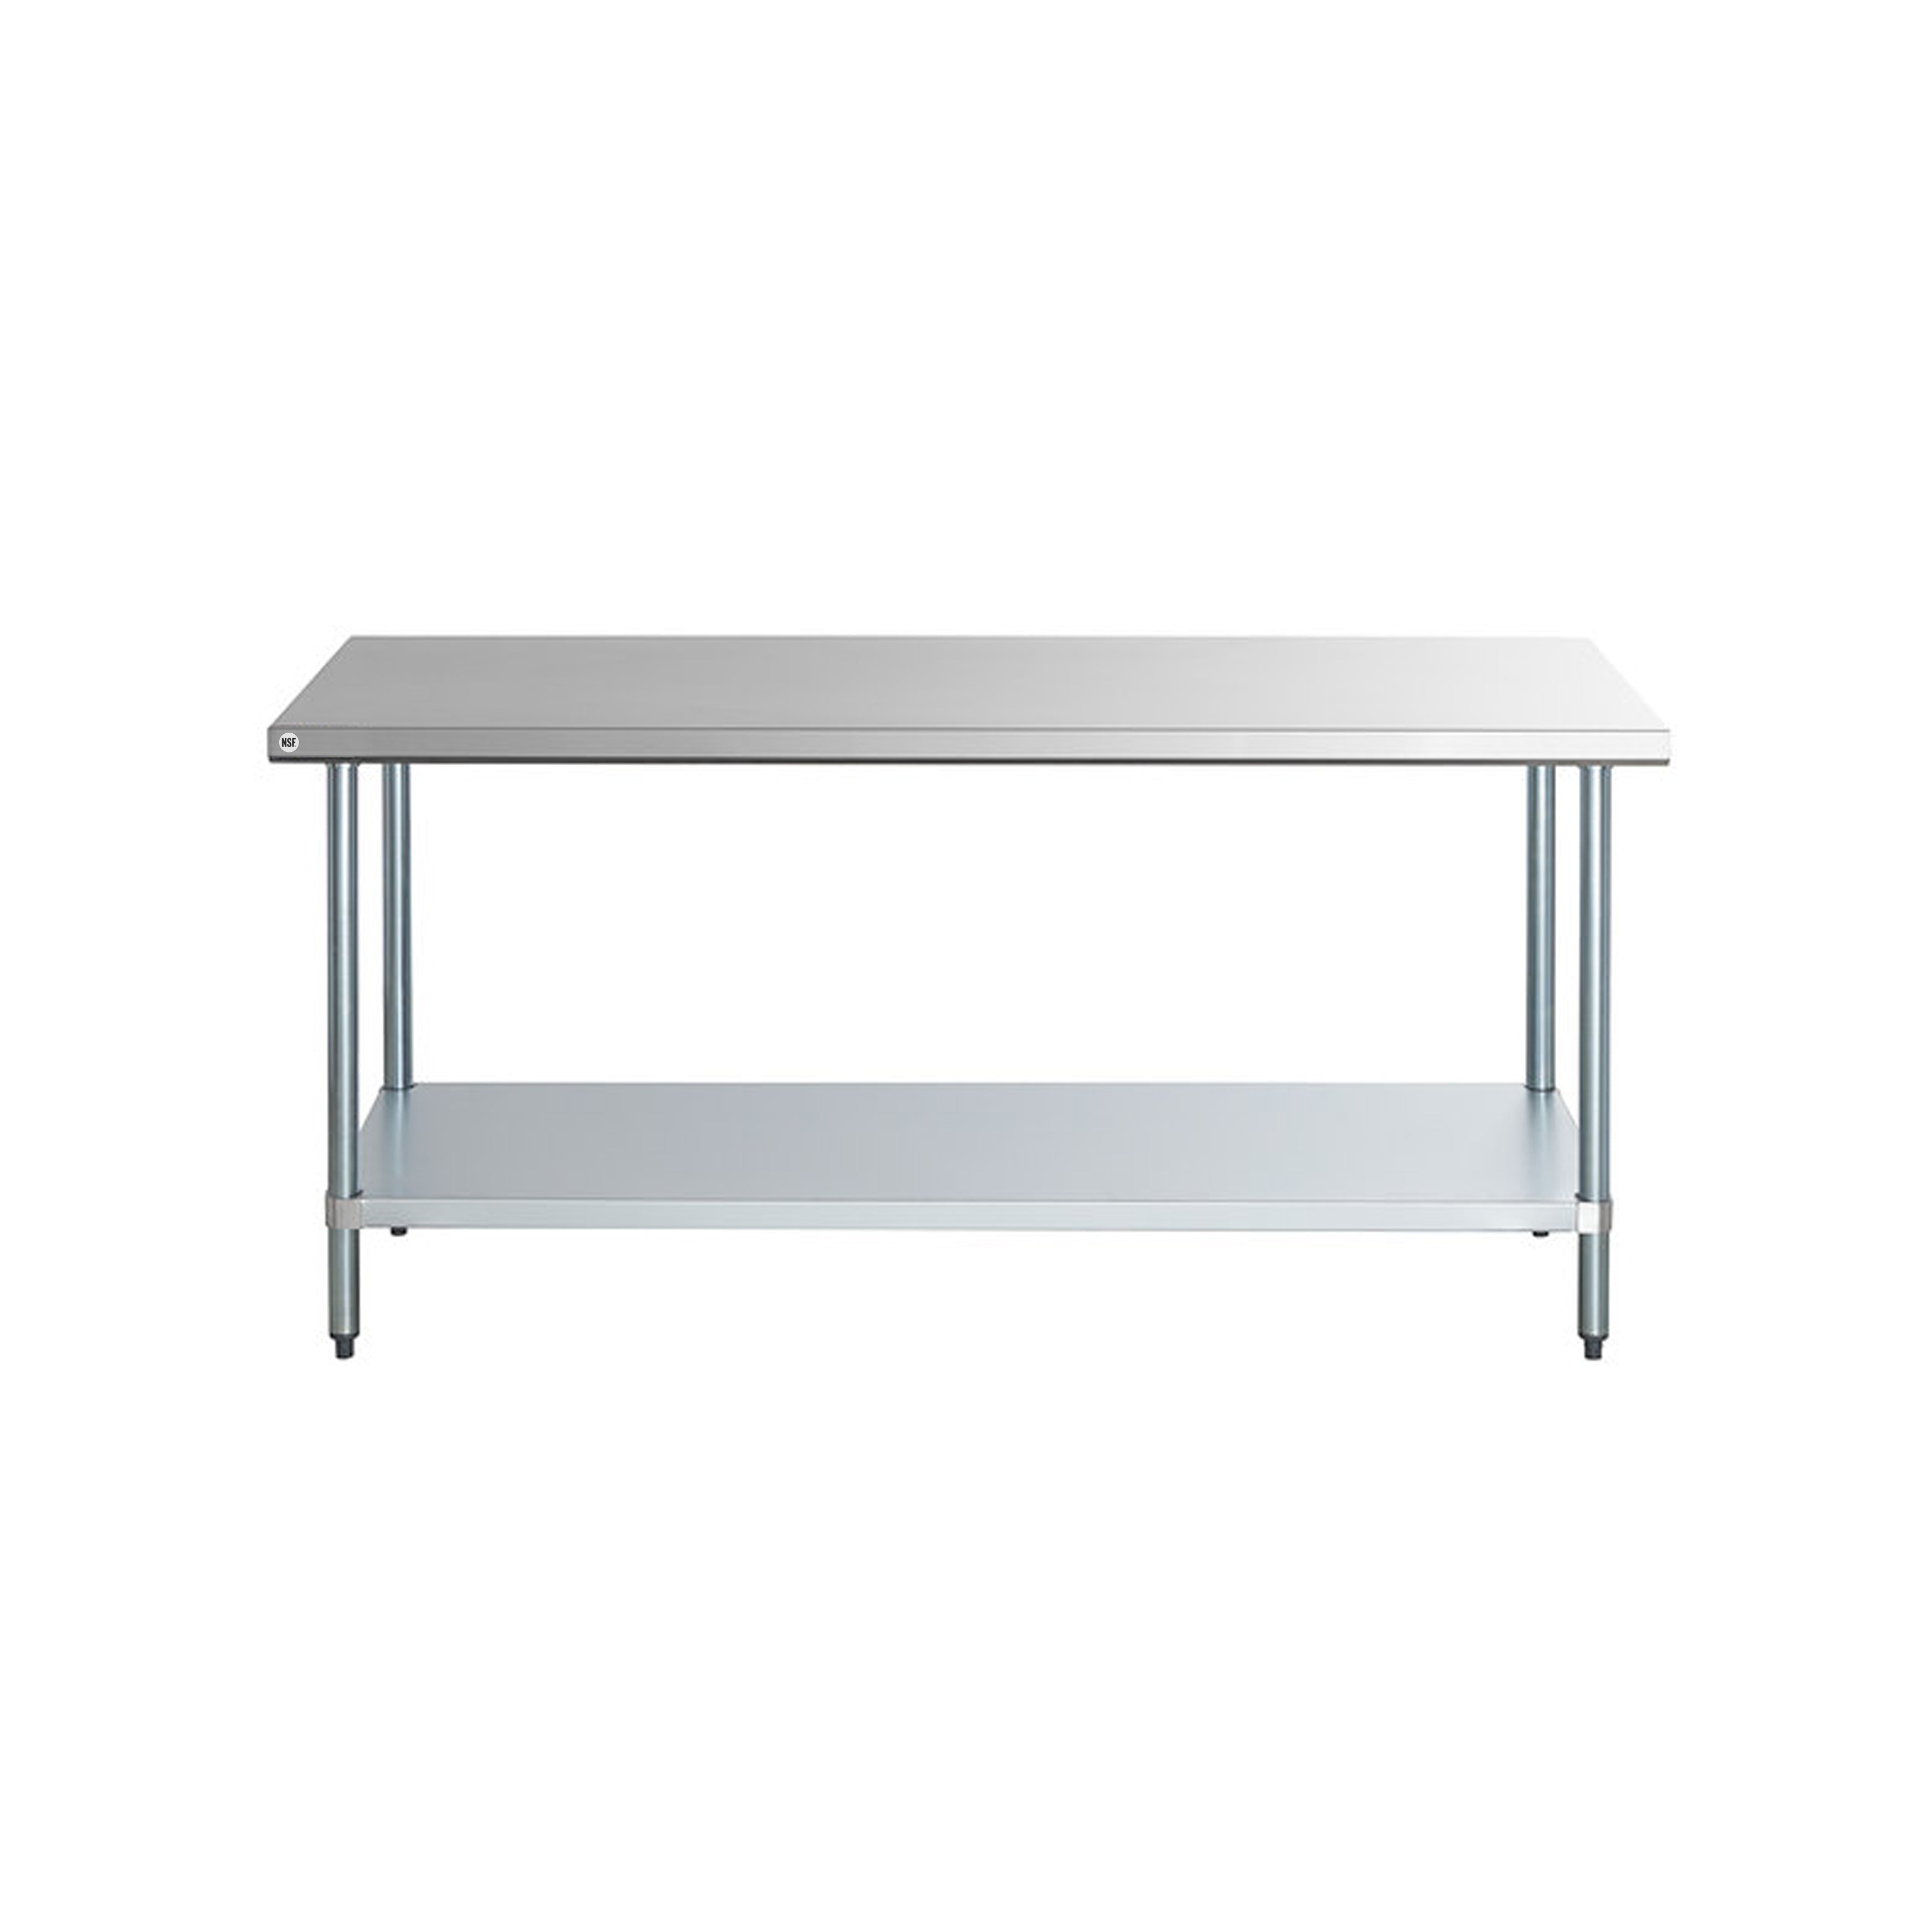 Omcan - 17586, Commercial 48" x 30" Stainless Steel Kitchen Work Table 1100lbs Medium Duty